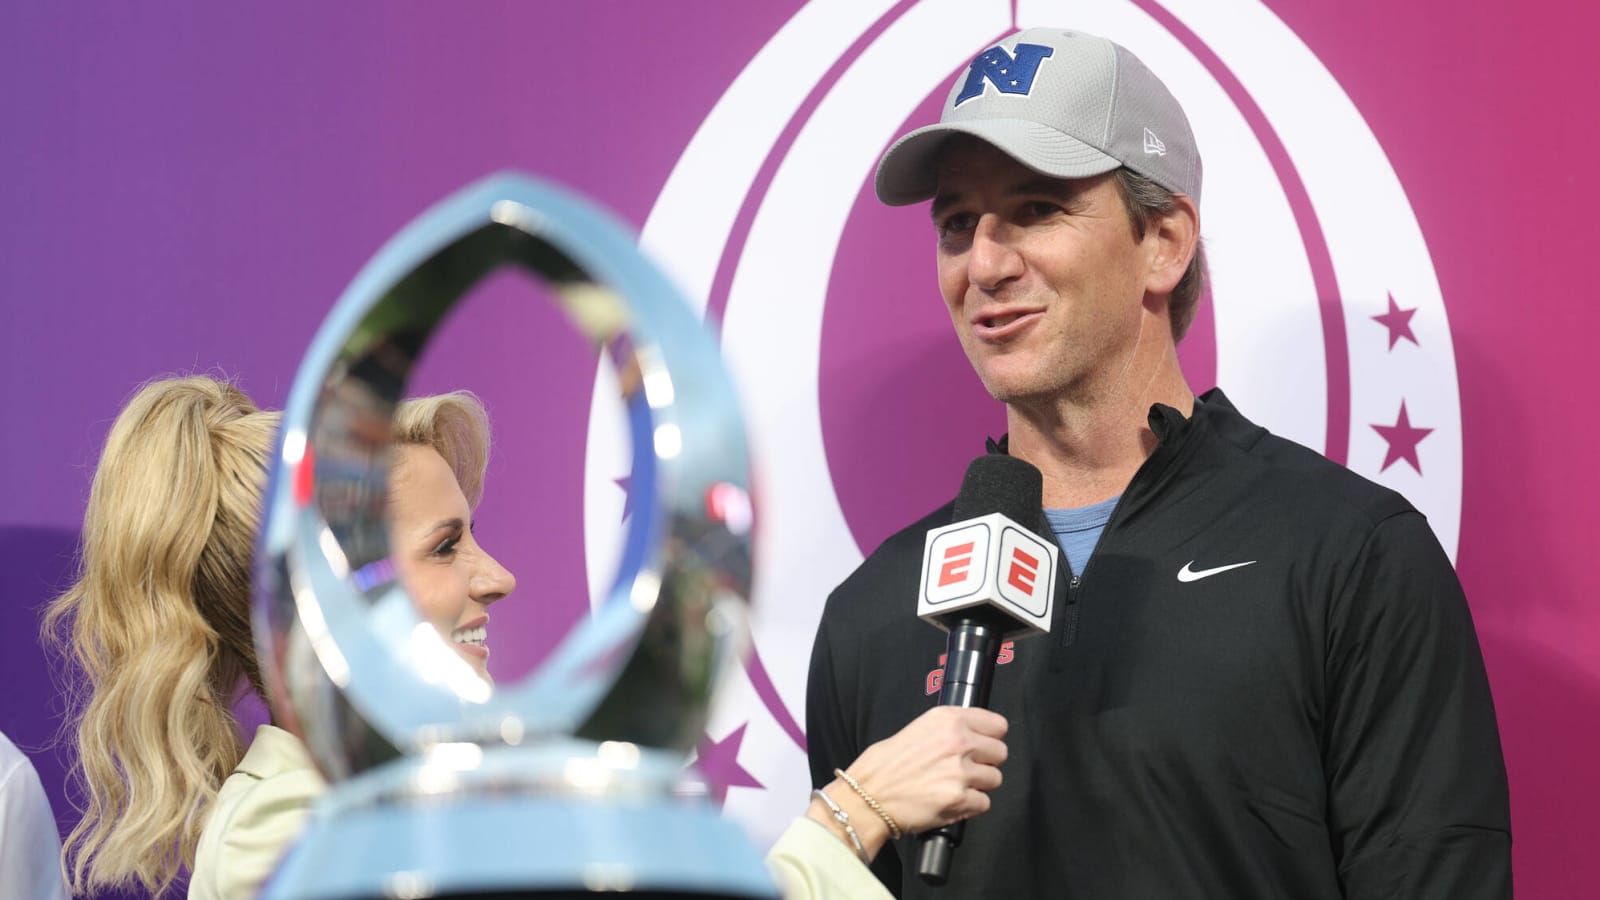 Giants legend Eli Manning eligible for Pro Football Hall of Fame in 2025